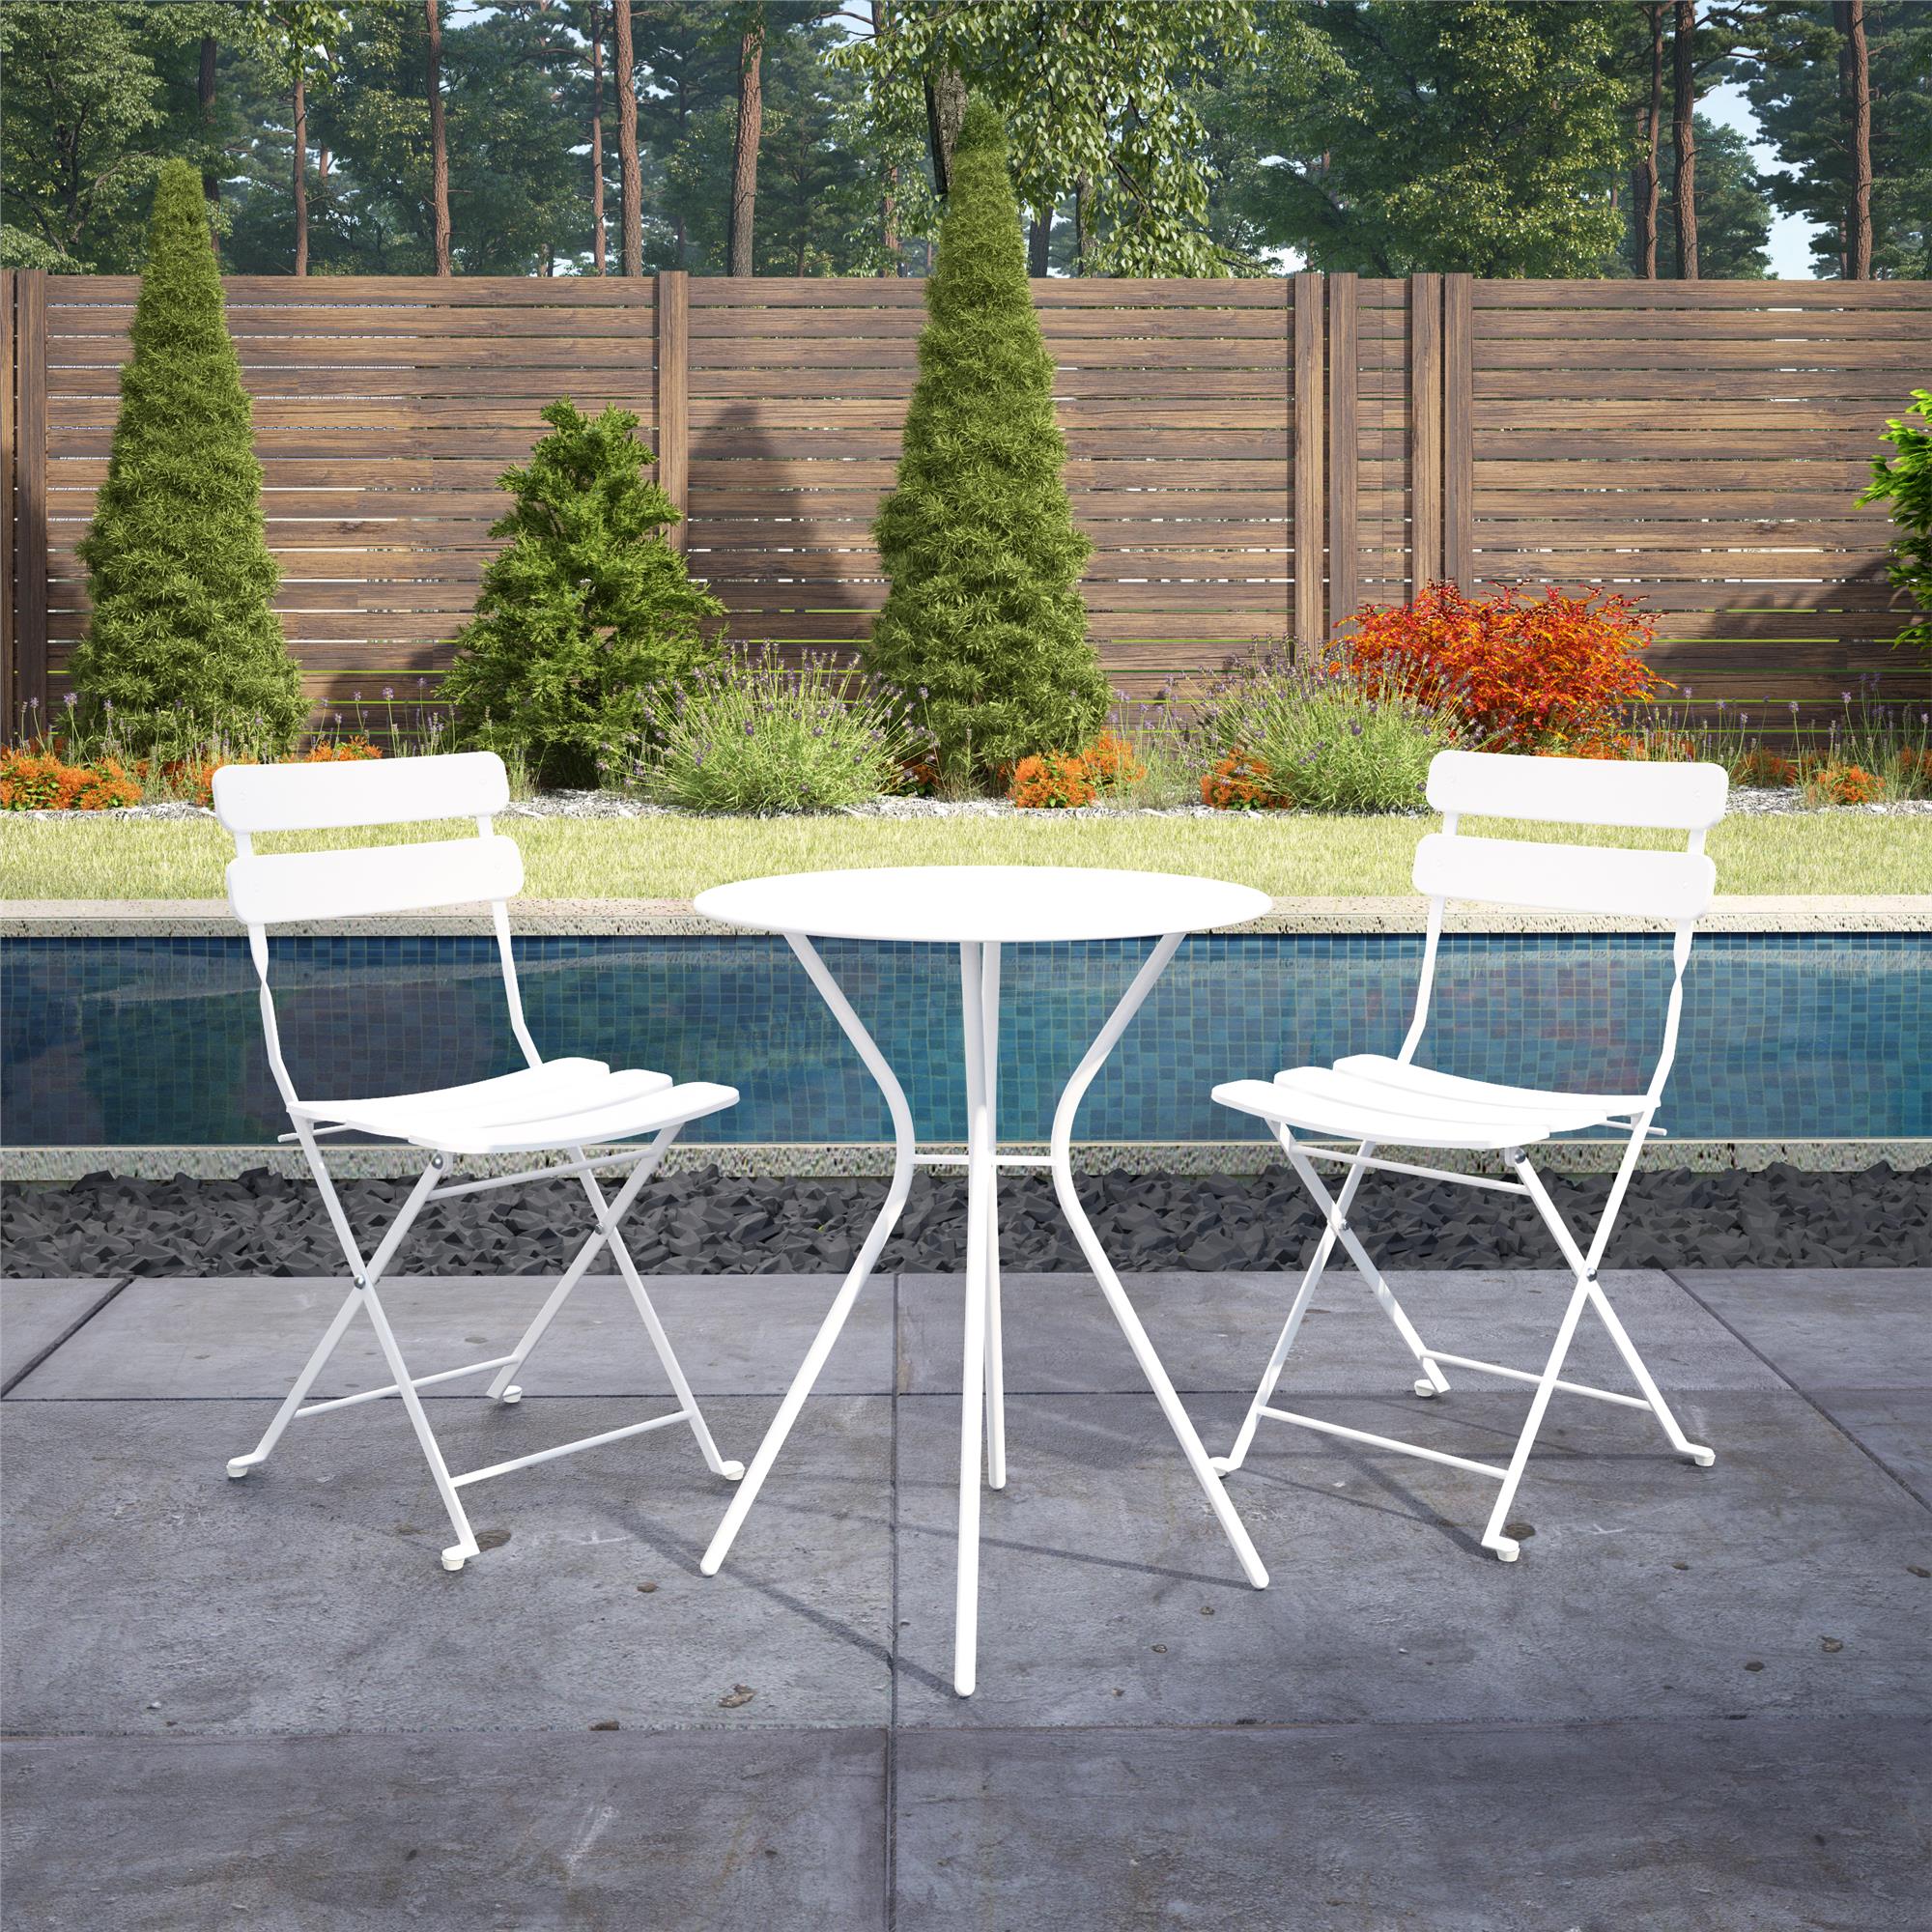 COSCO Outdoor Living, 3 Piece Bistro Set with 2 Folding Chairs, White - image 2 of 7